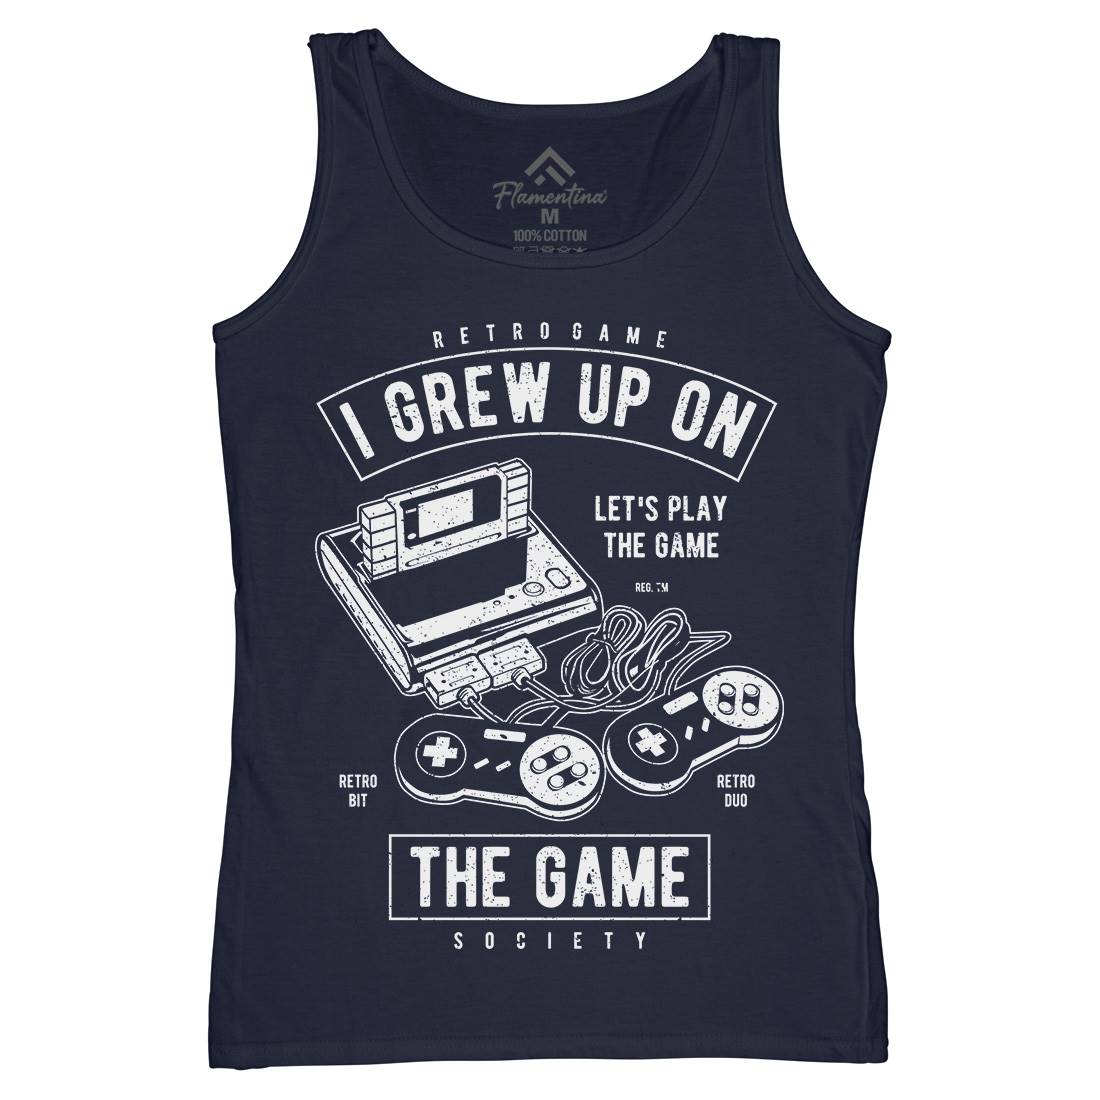 Grew Up On The Game Womens Organic Tank Top Vest Geek A679